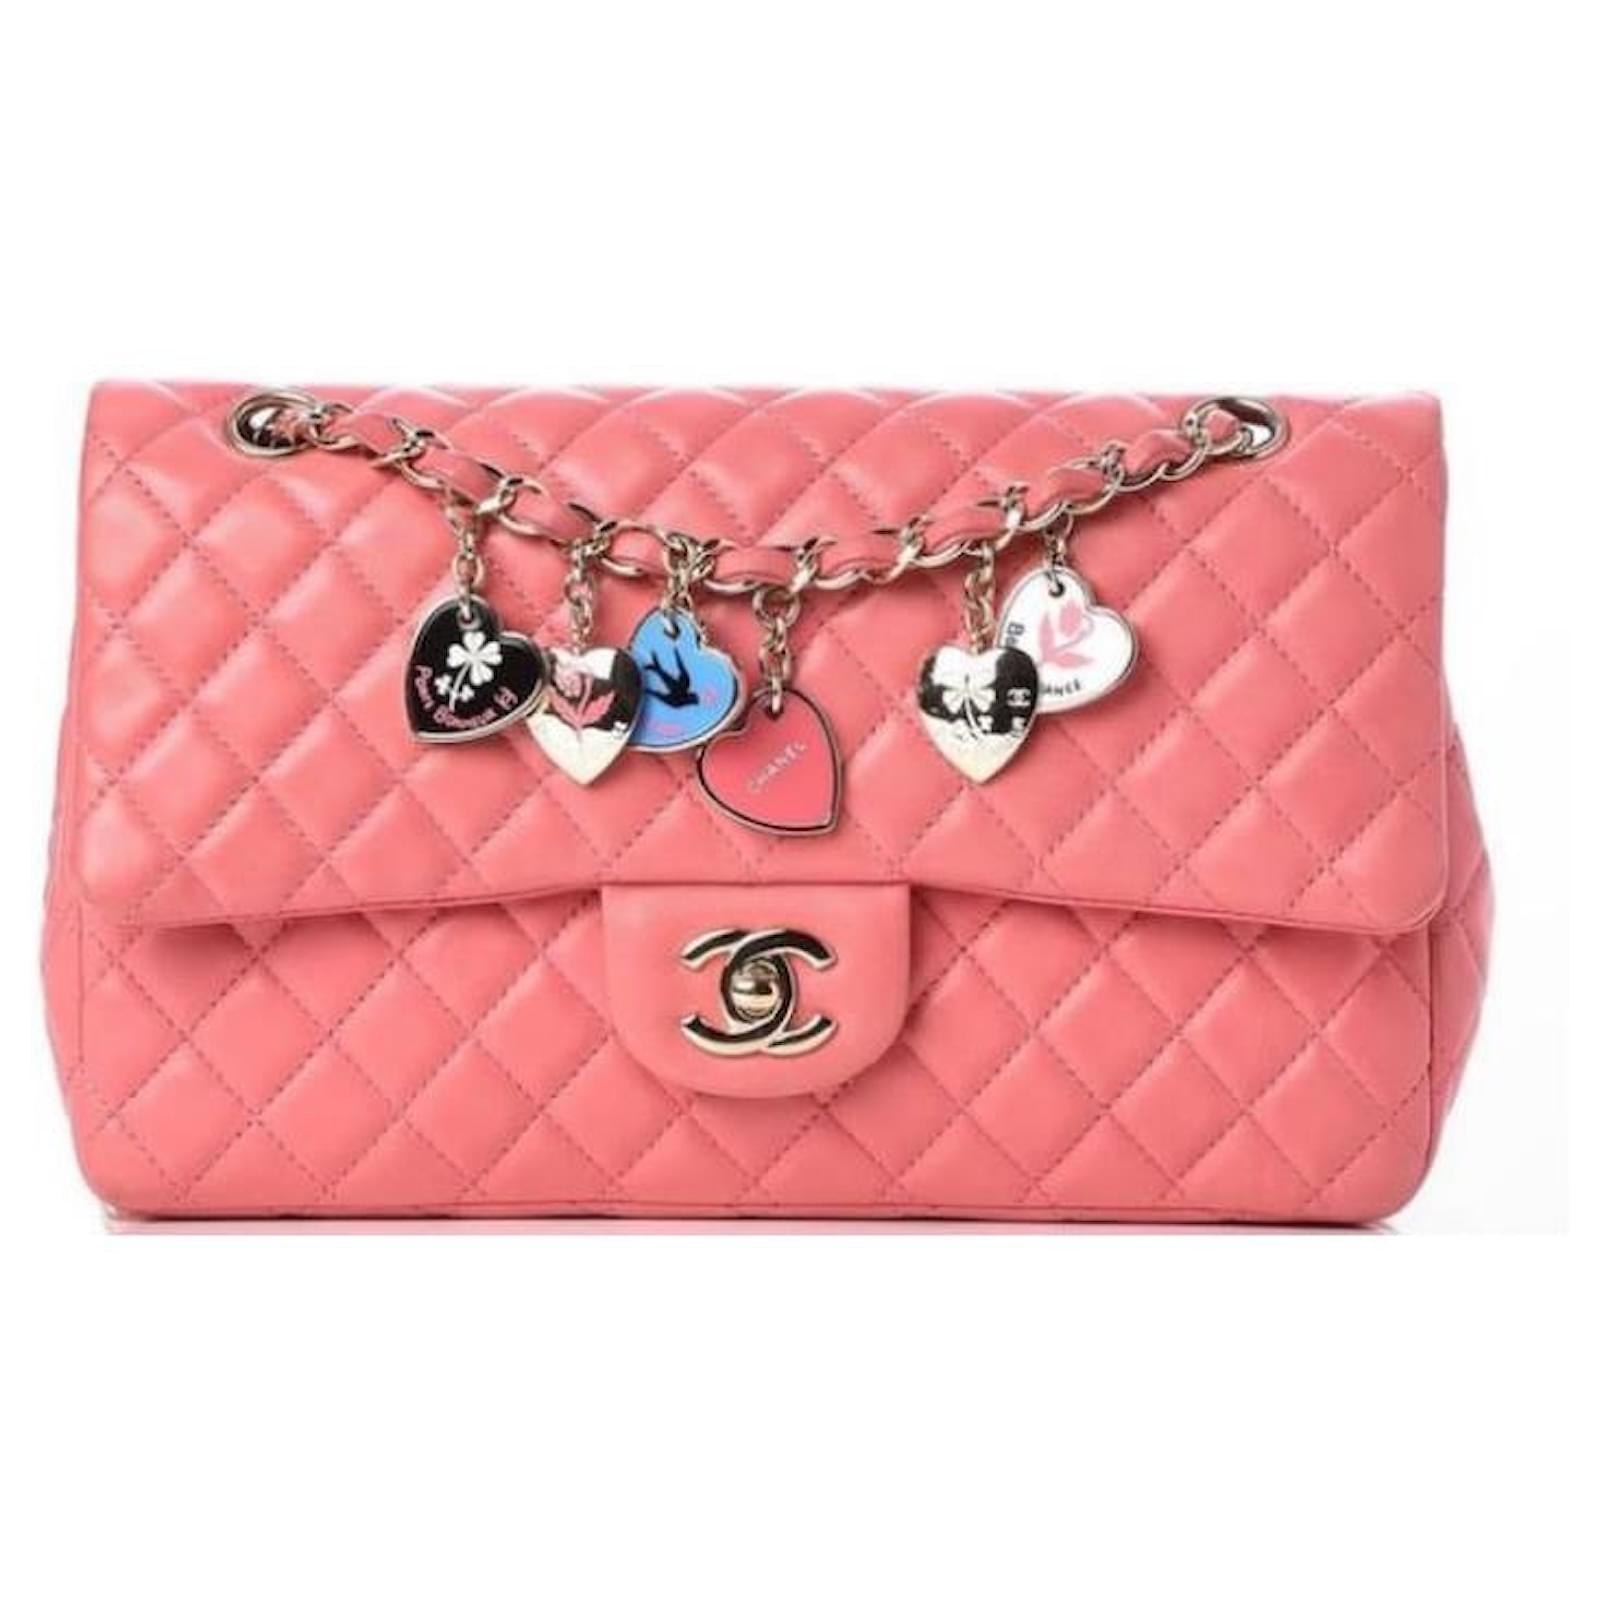 Chanel Black Two Tone Limited Edition Mini Top Handle Flap Bag